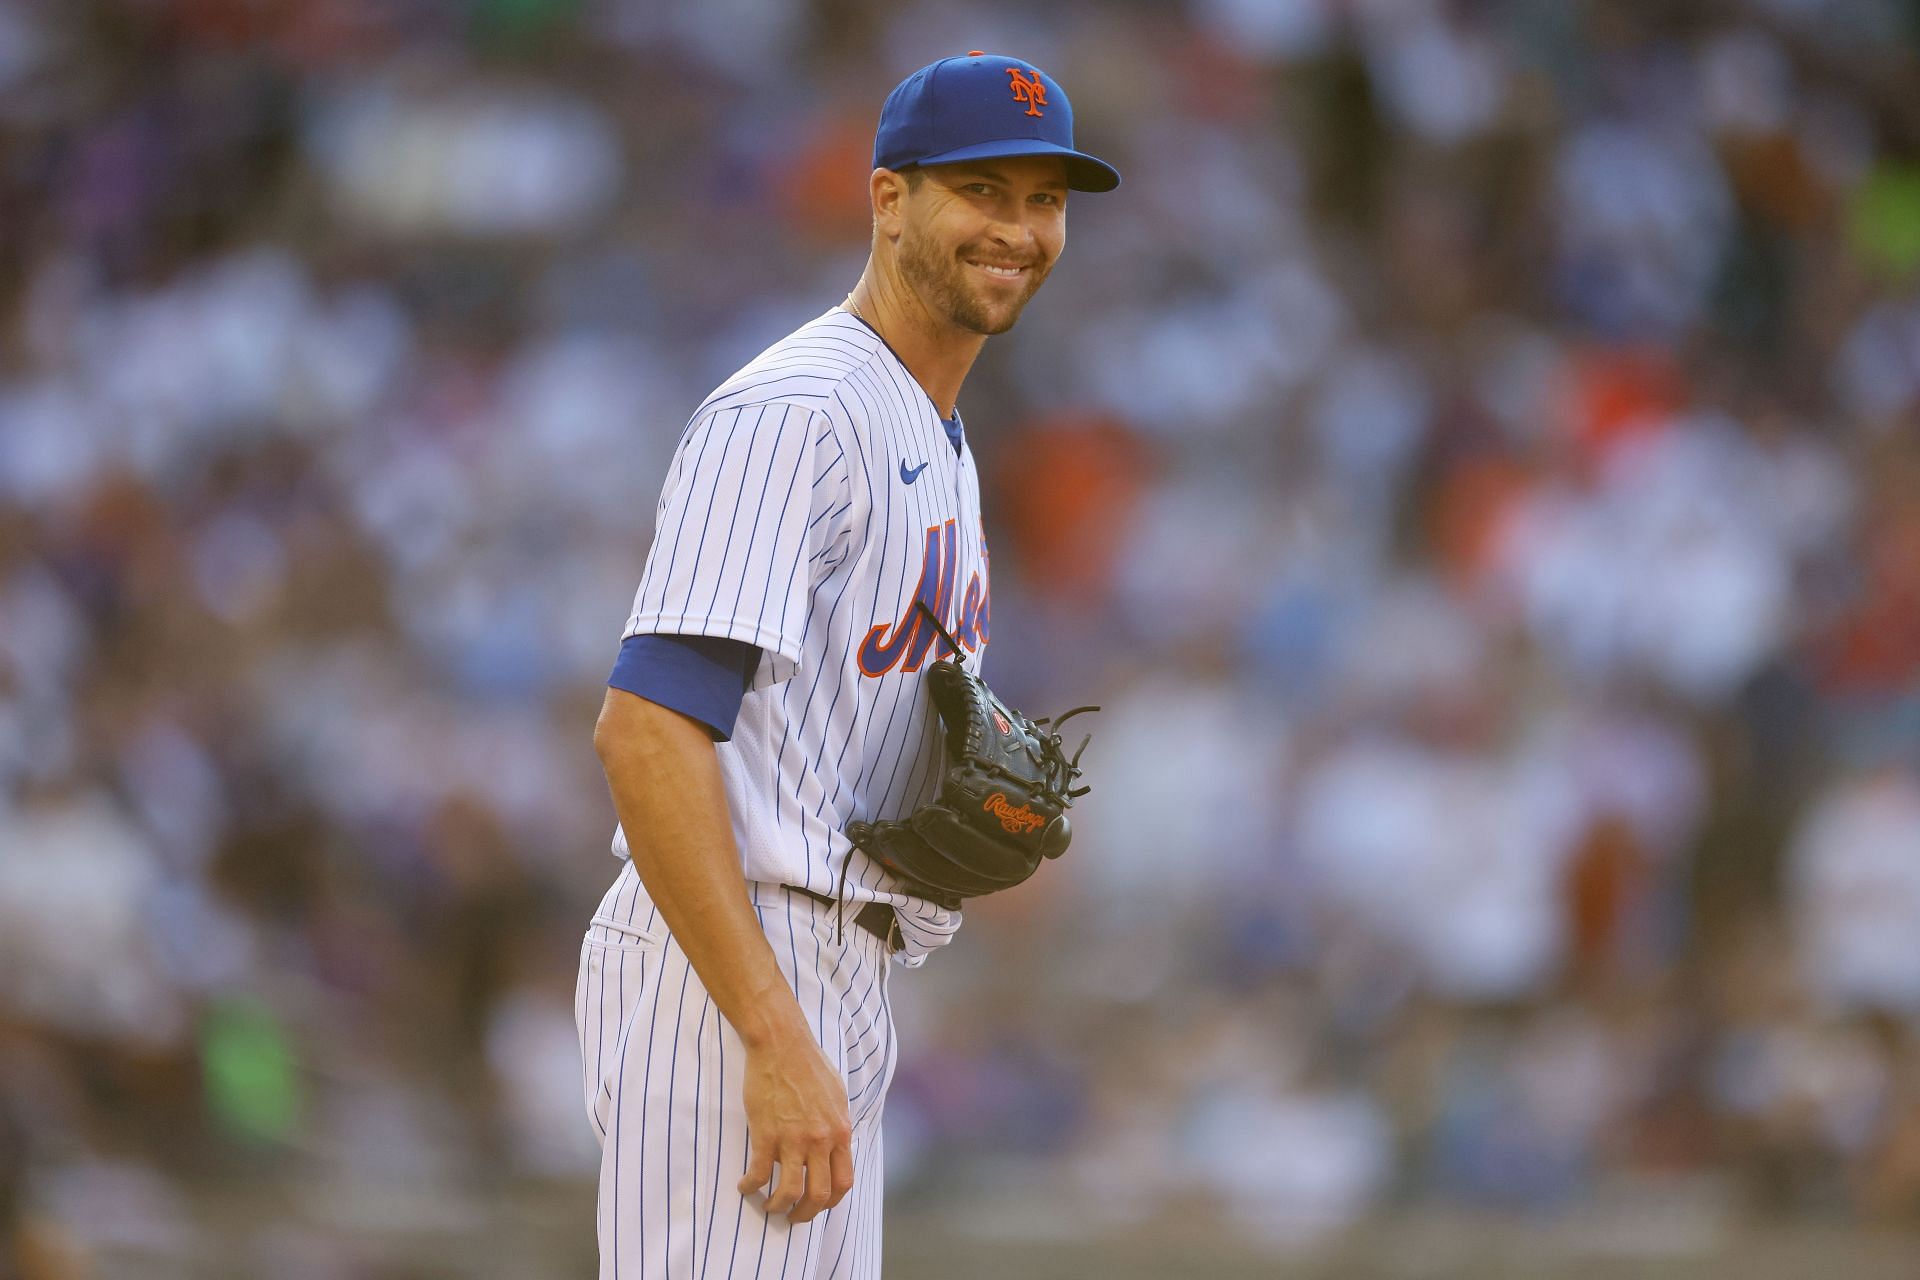 The most embarrassing, pathetic, and unlucky series Worst we've looked  all year - Braves fans react to team losing four of five games to Mets as Jacob  deGrom throws 12 strikeouts